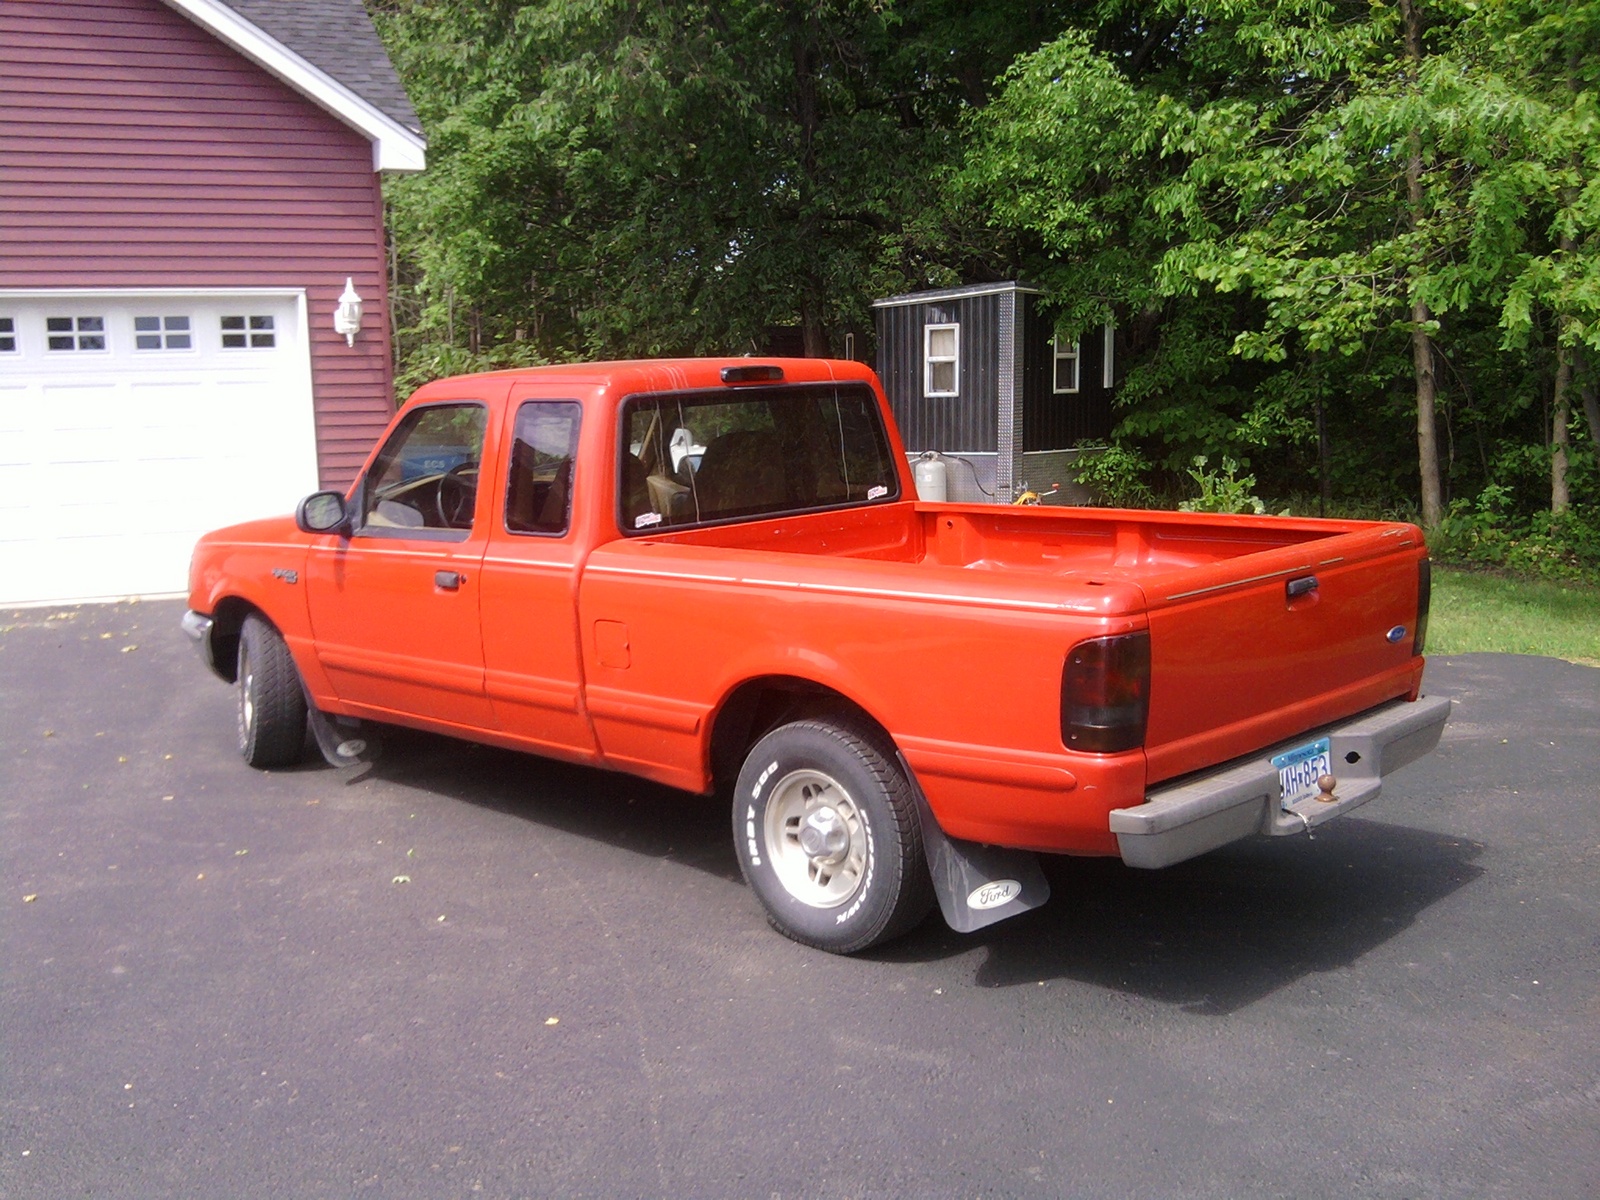 1996 Ford ranger extended cab reviews #4